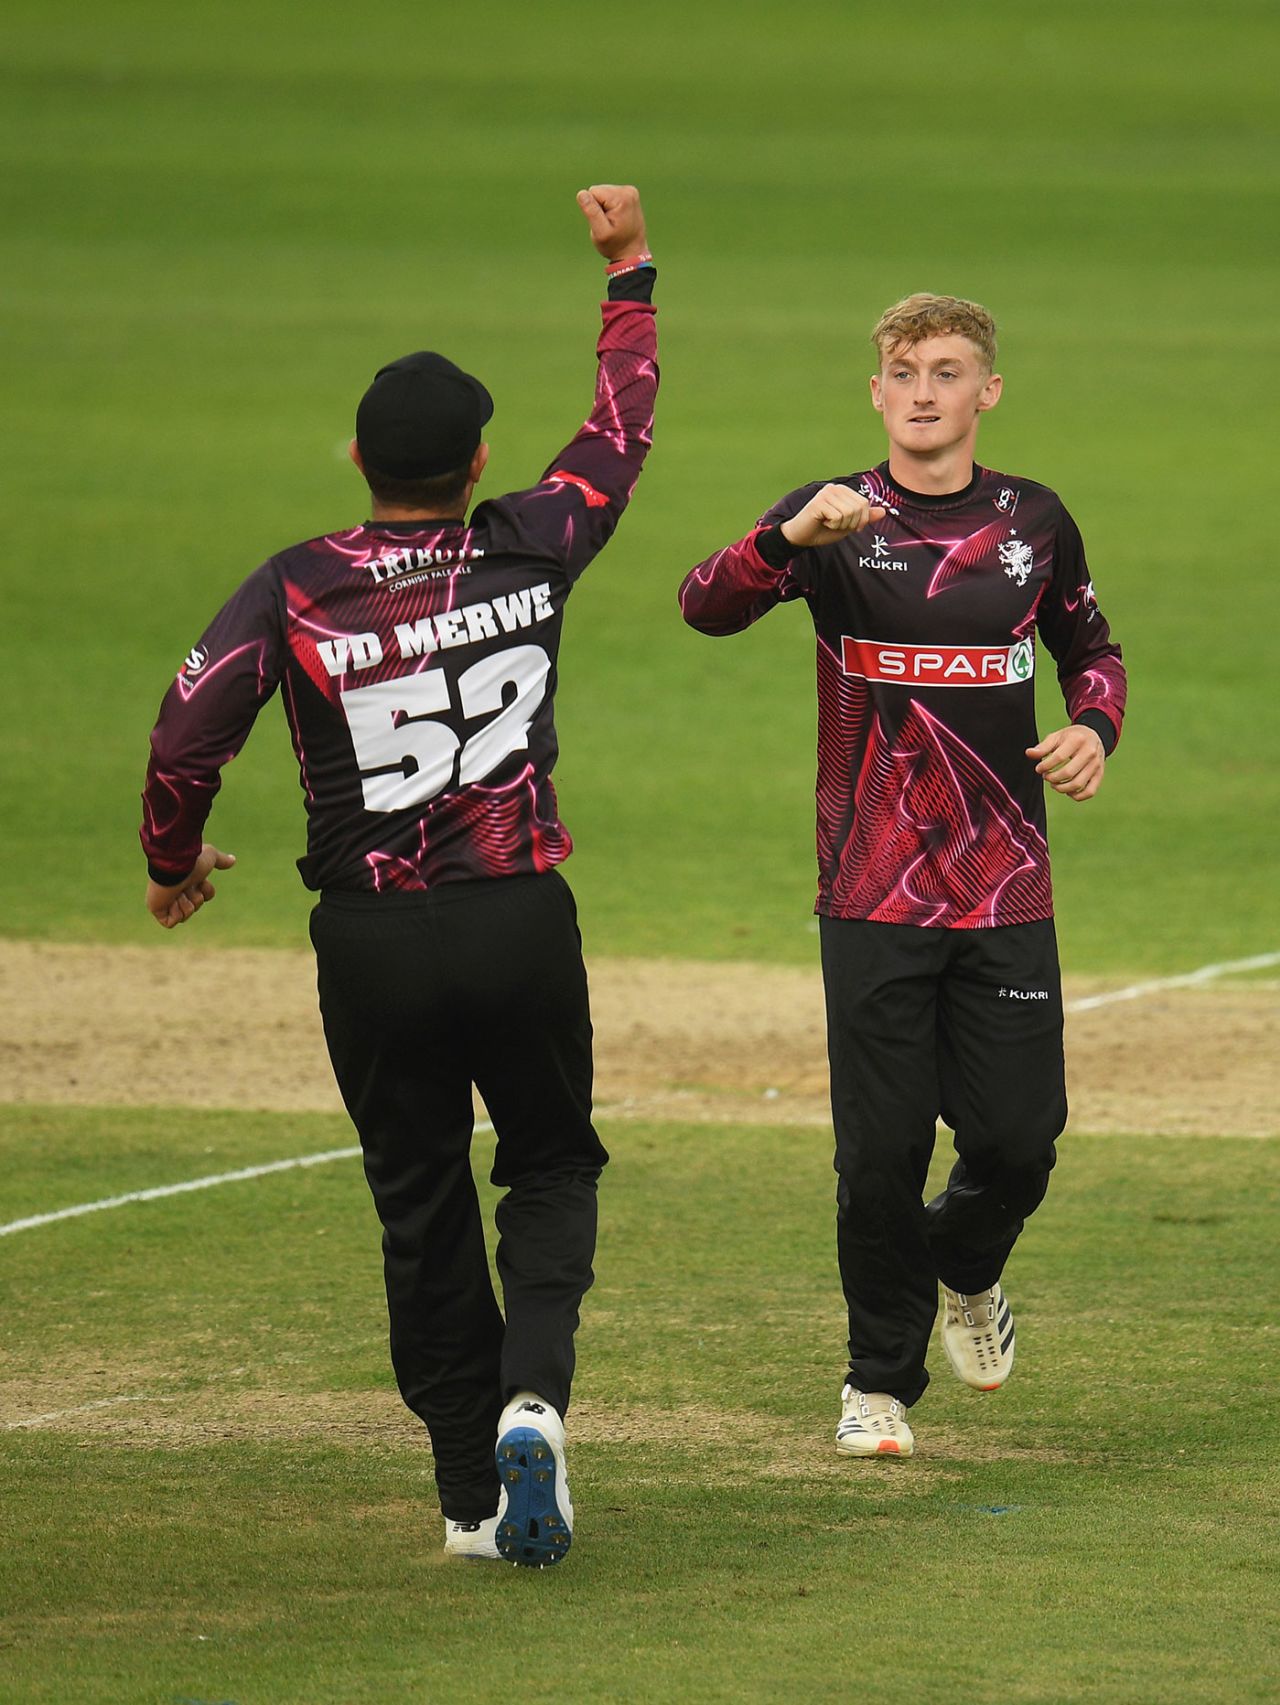 Lewis Goldsworthy claims another wicket for Somerset, Somerset v Northamptonshire, Vitality Blast, September 18, 2020